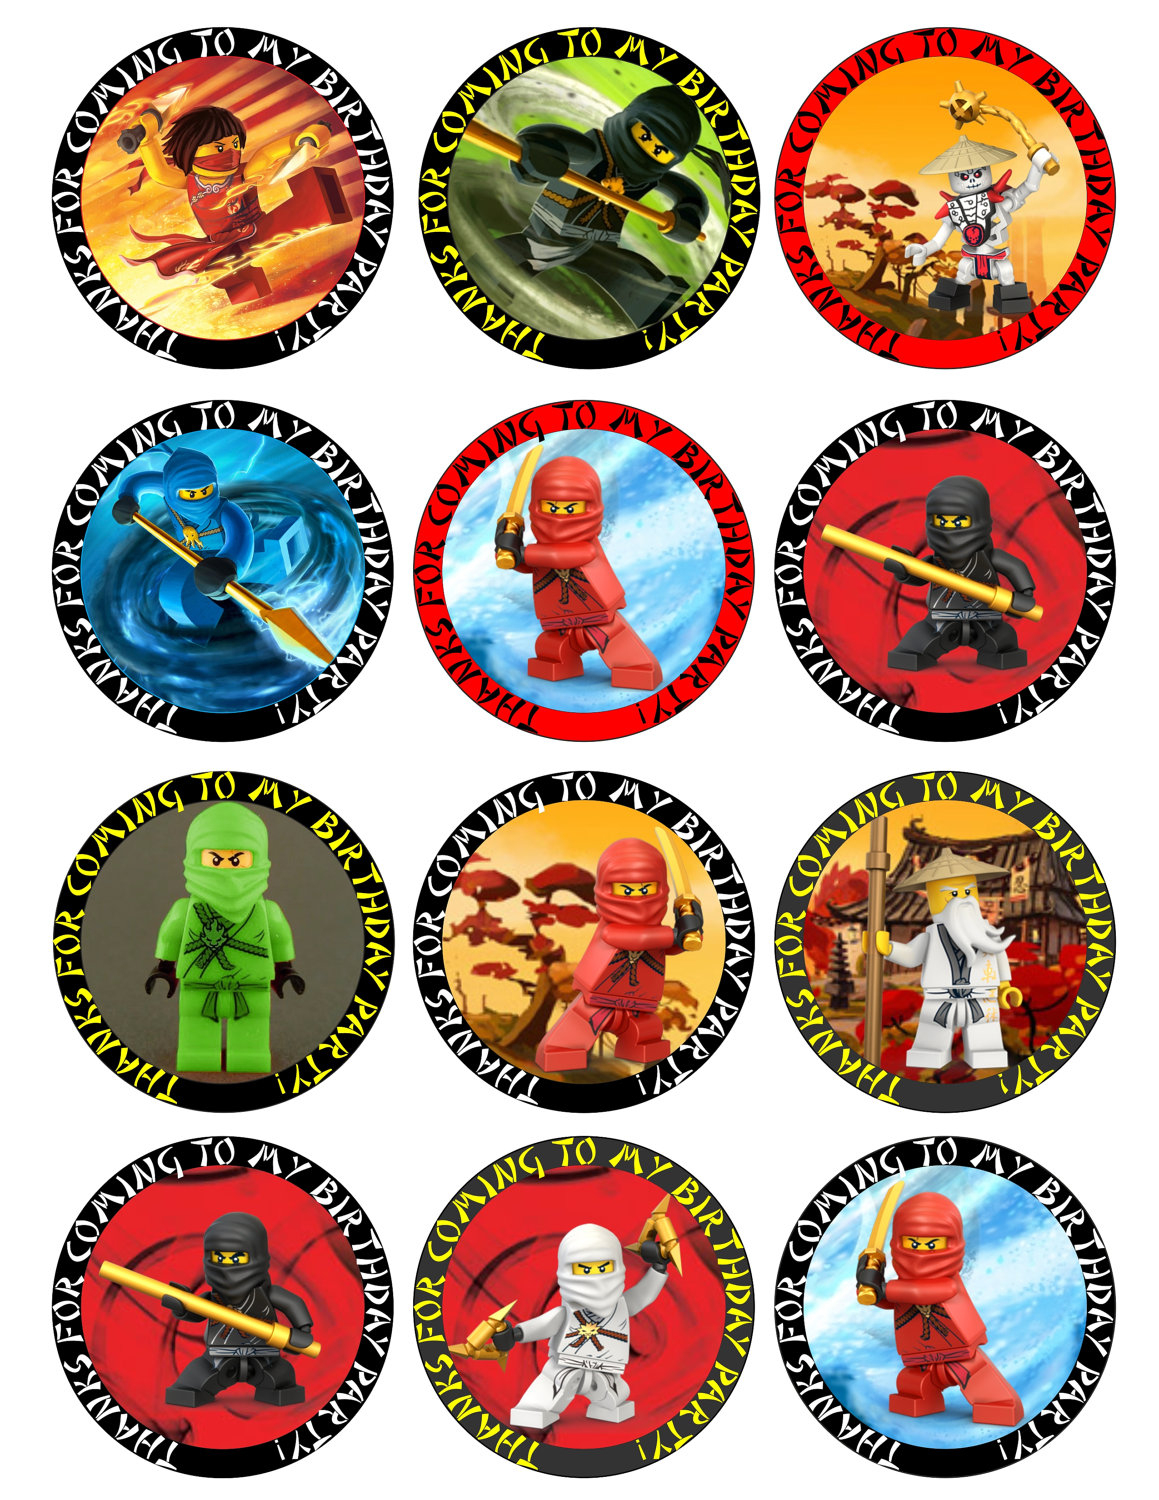 Ninjago Free Printable Toppers, Labels, Images And Invitations. - Oh - Free Printable Lego Cupcake Toppers